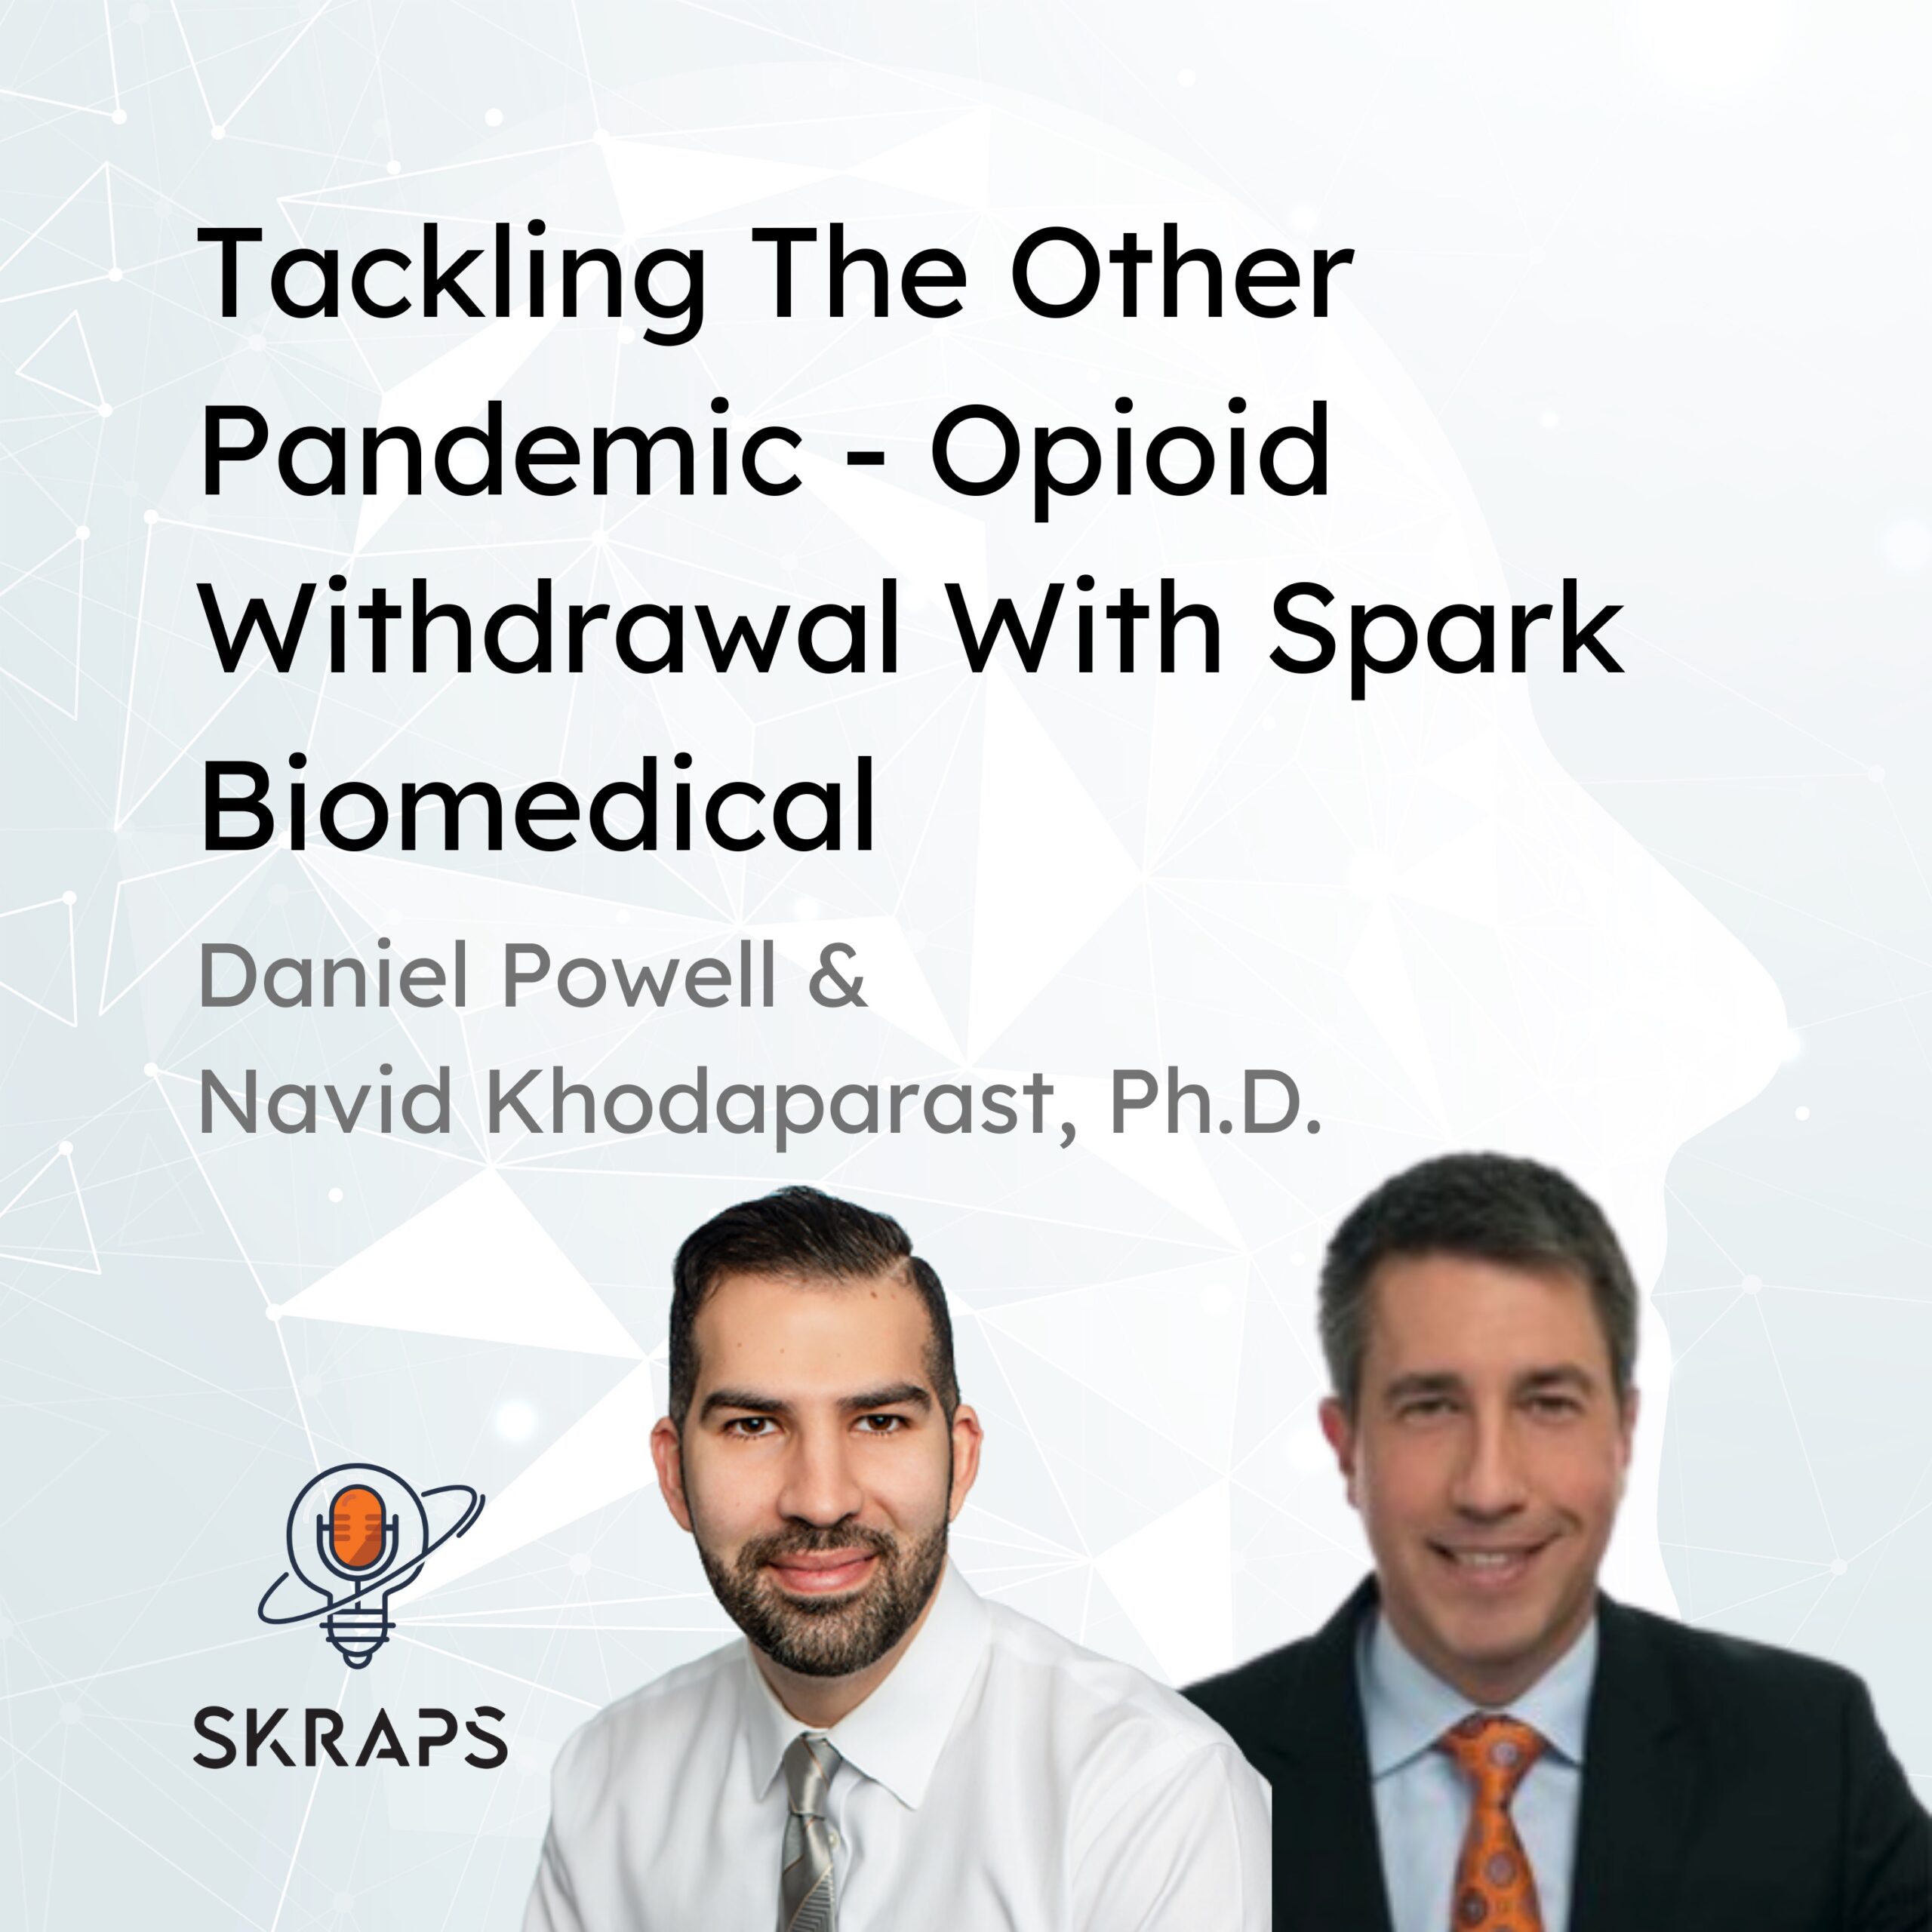 Tackling the Other Pandemic – Opioid Use Withdrawal with Spark Biomedical